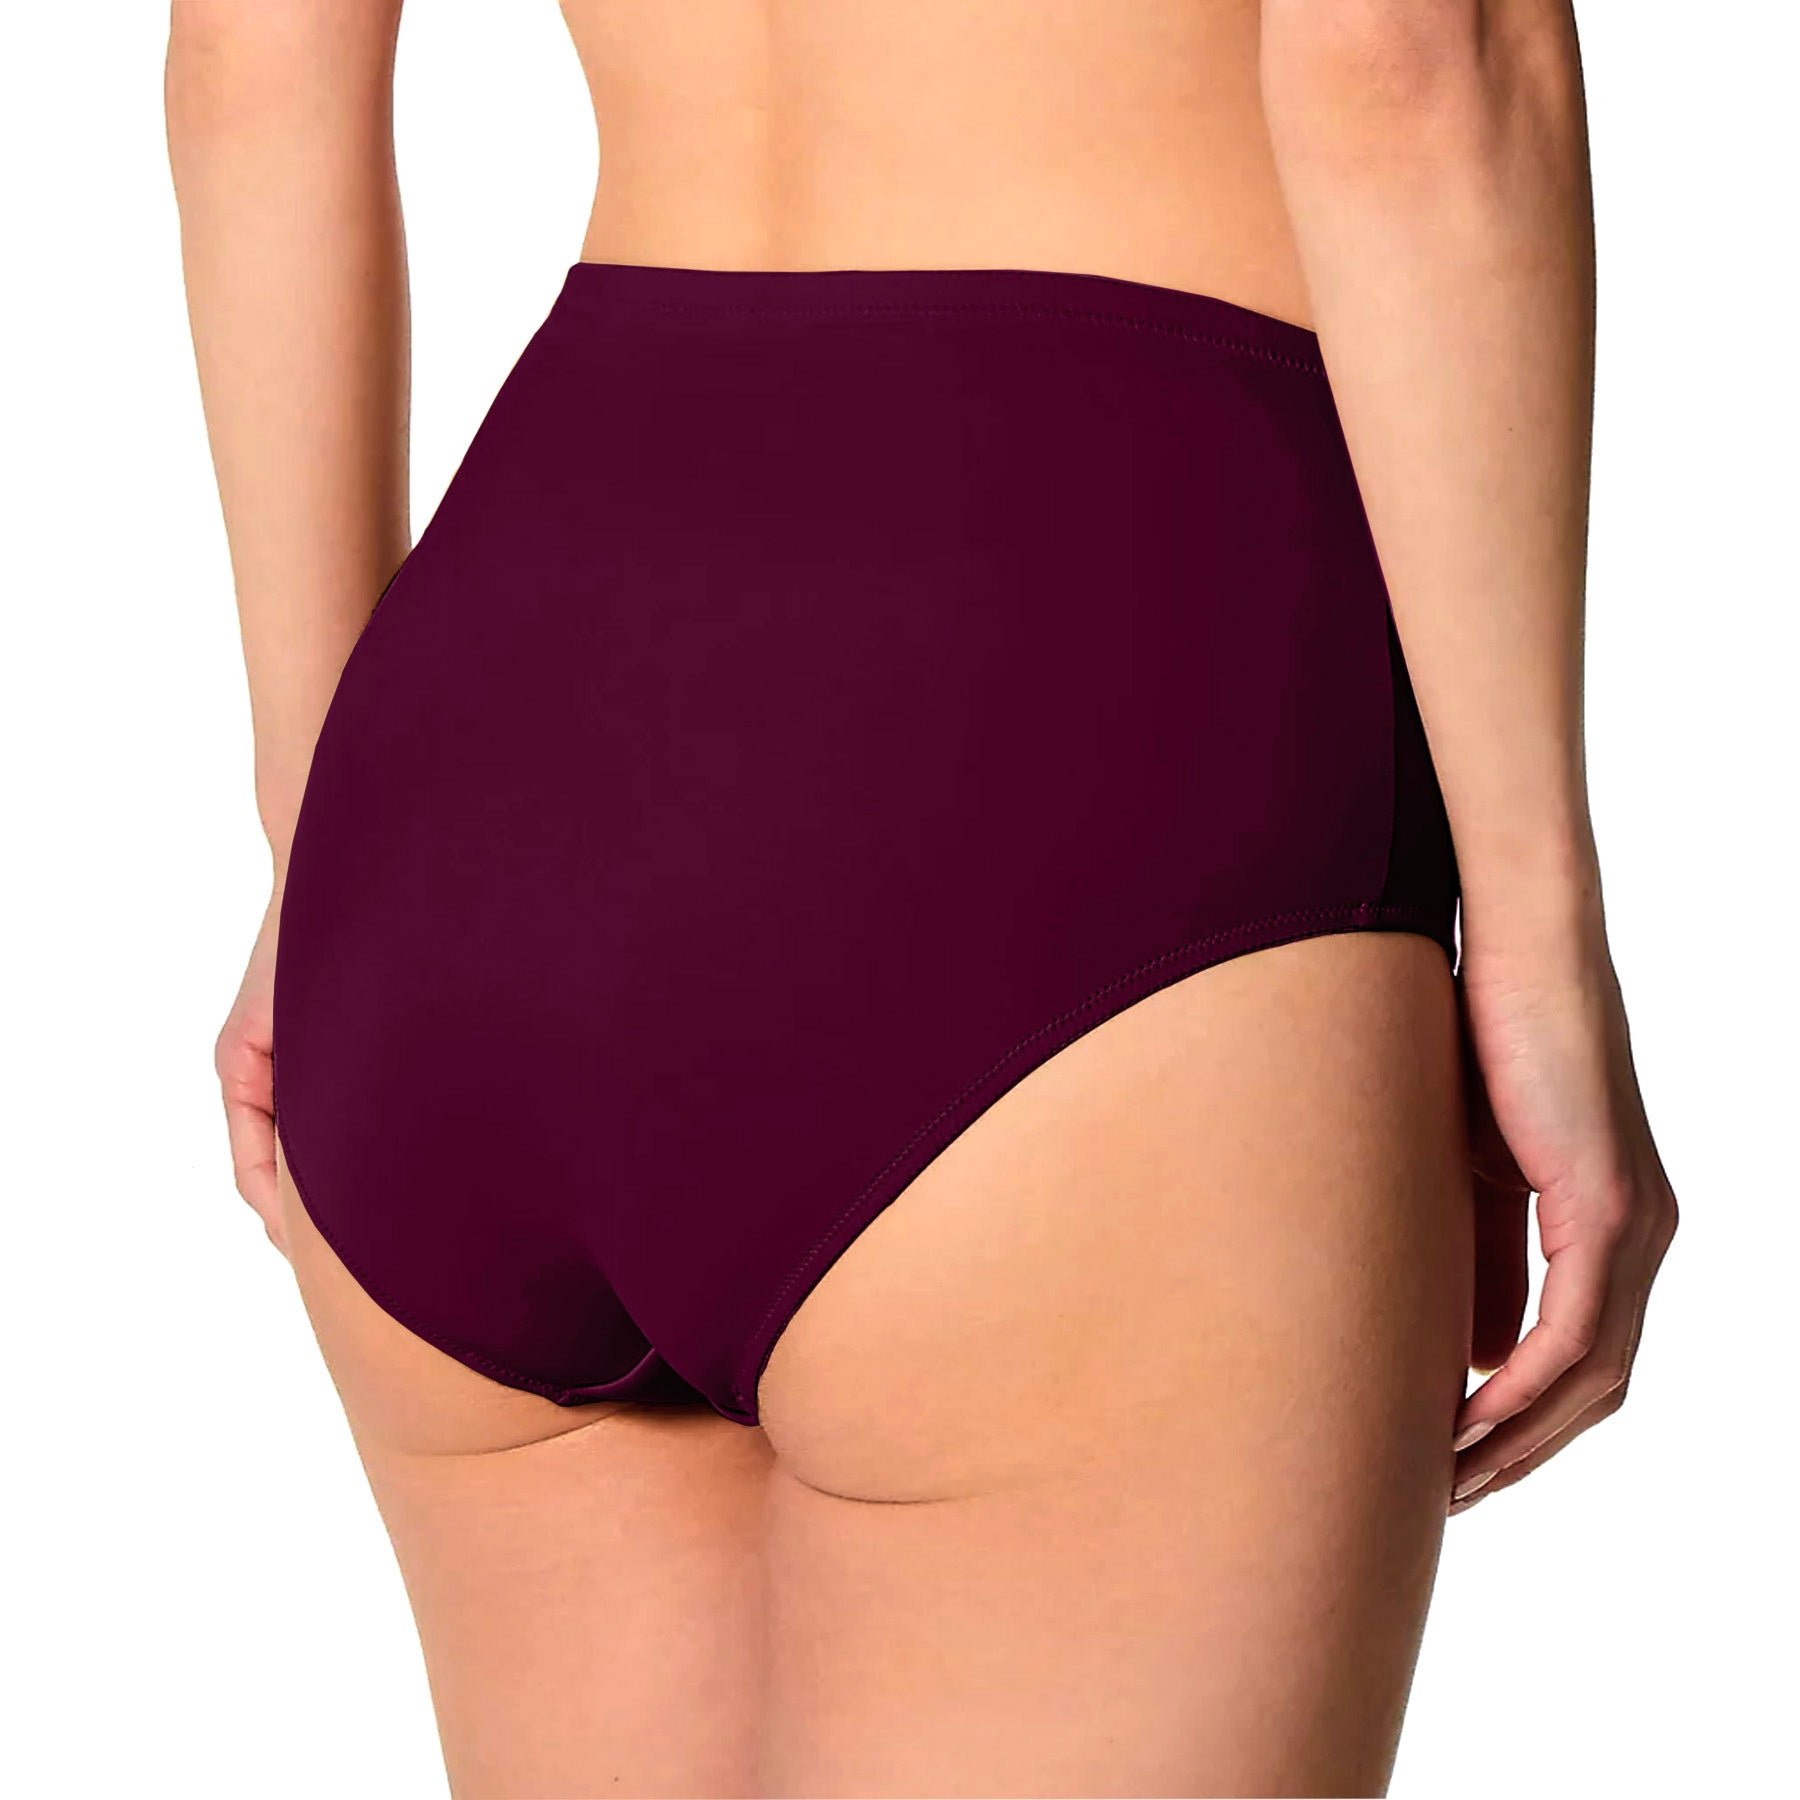 Fit Fully Yours Elise Brief U1813 Plum Rear View